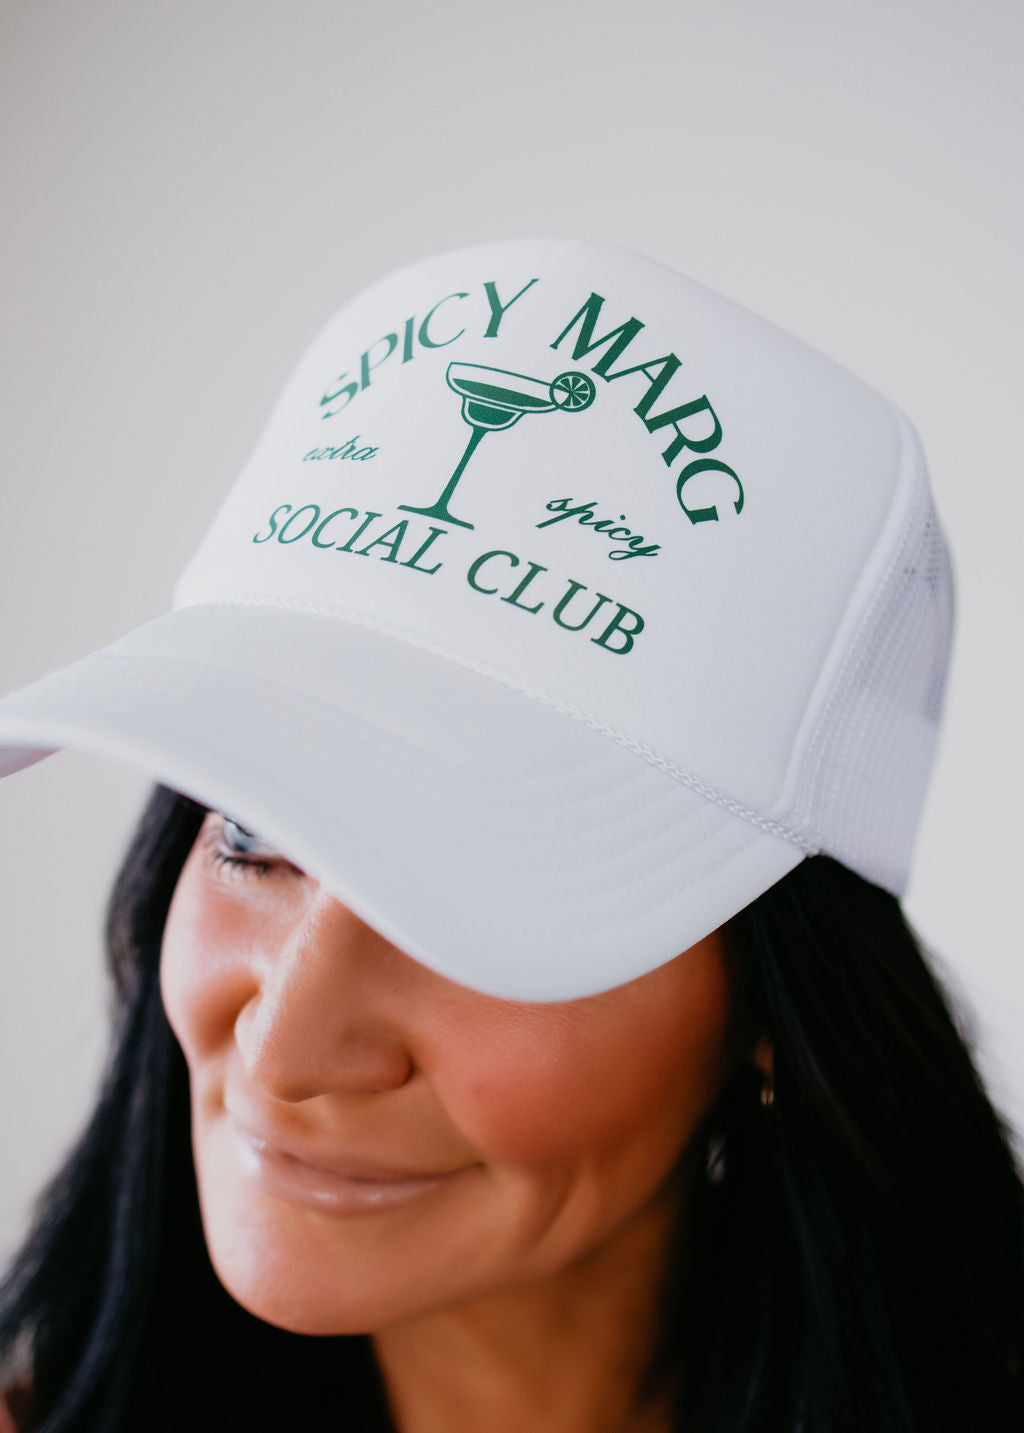 image of Spicy Marg Social Club Hat